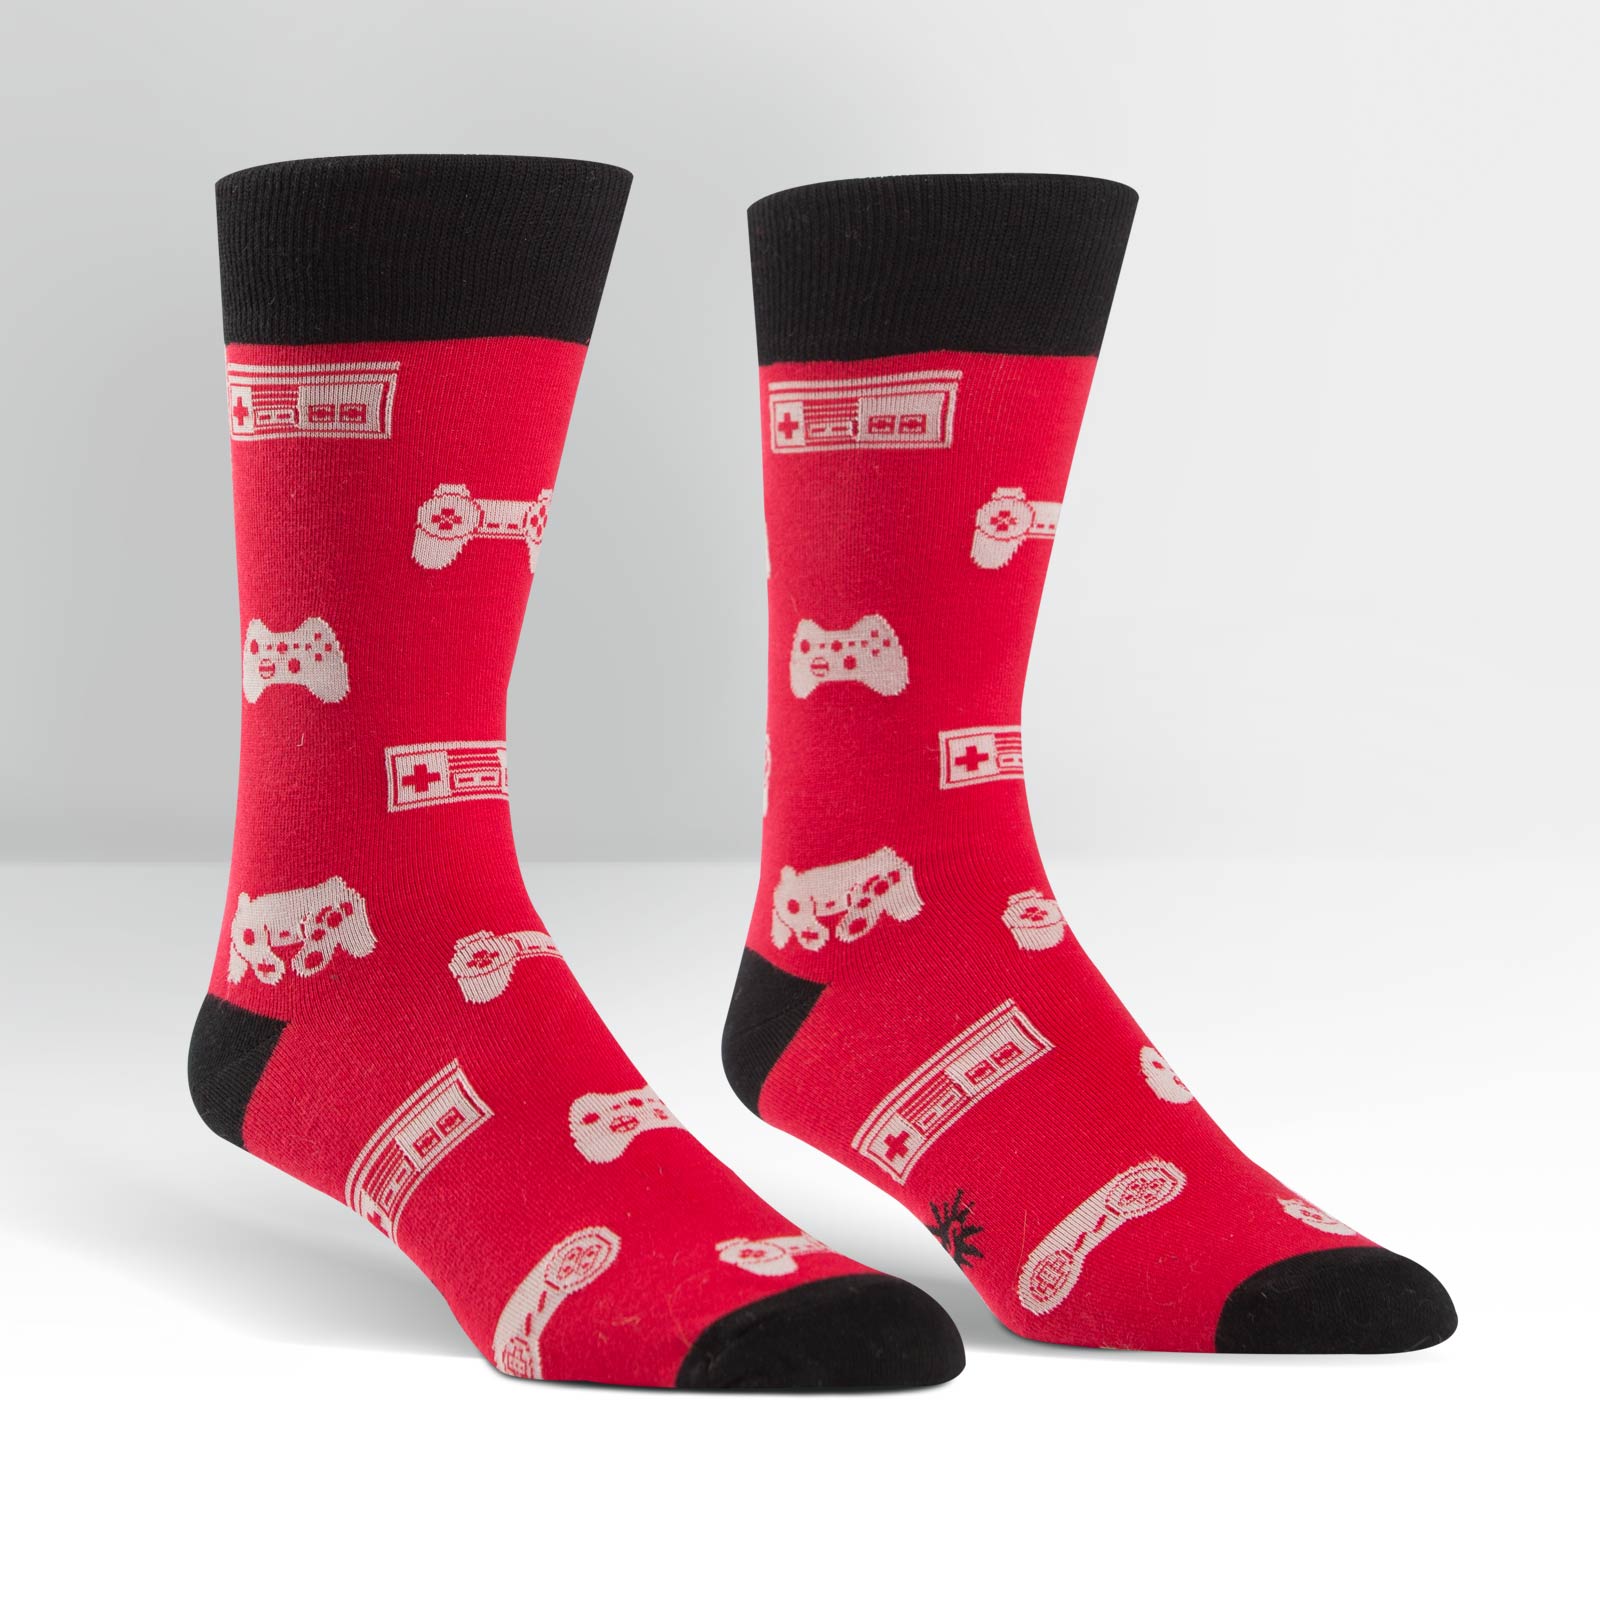 Sock It To Me Multi-Player men's crew sock featuring red sock with black cuff, heel, and toes and white video game controllers all over. Socks shown on display feet. 